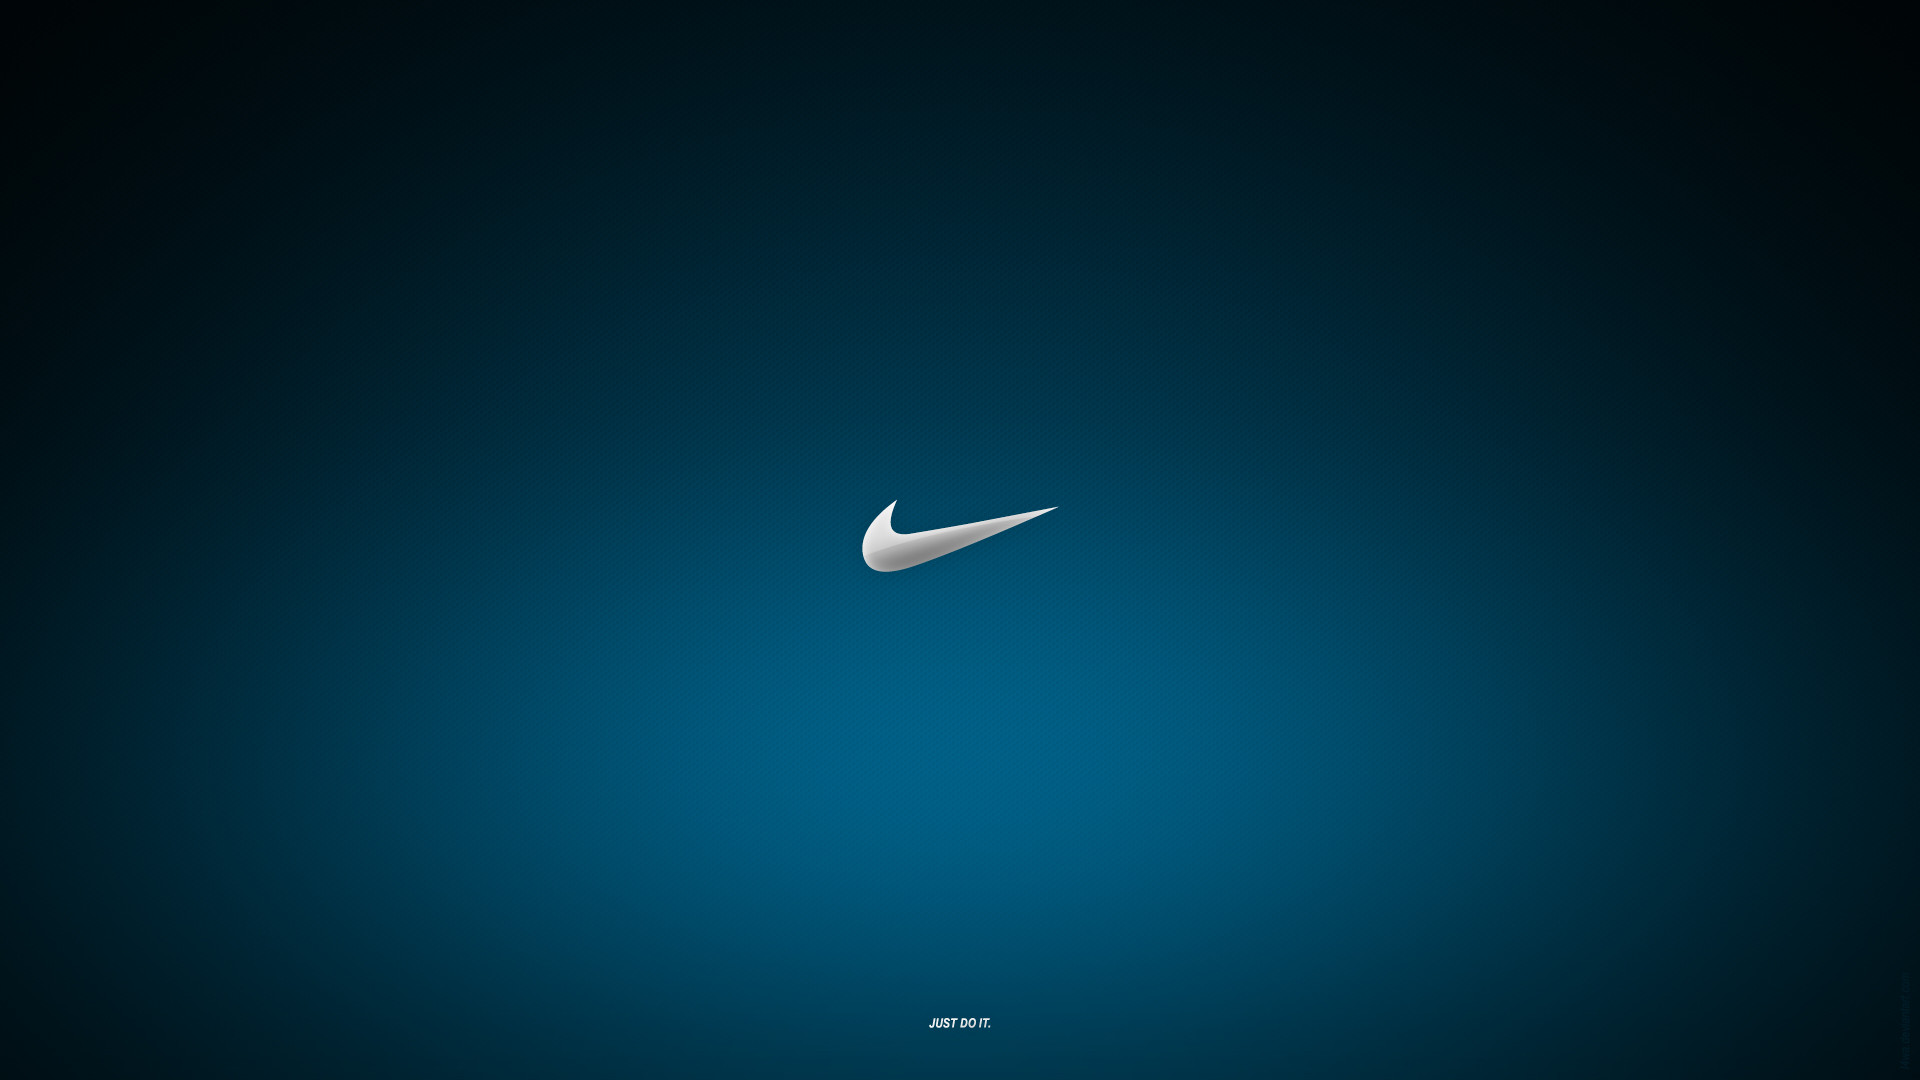 Nike Logo Blue HD Wallpapers for iPhone is a fantastic HD